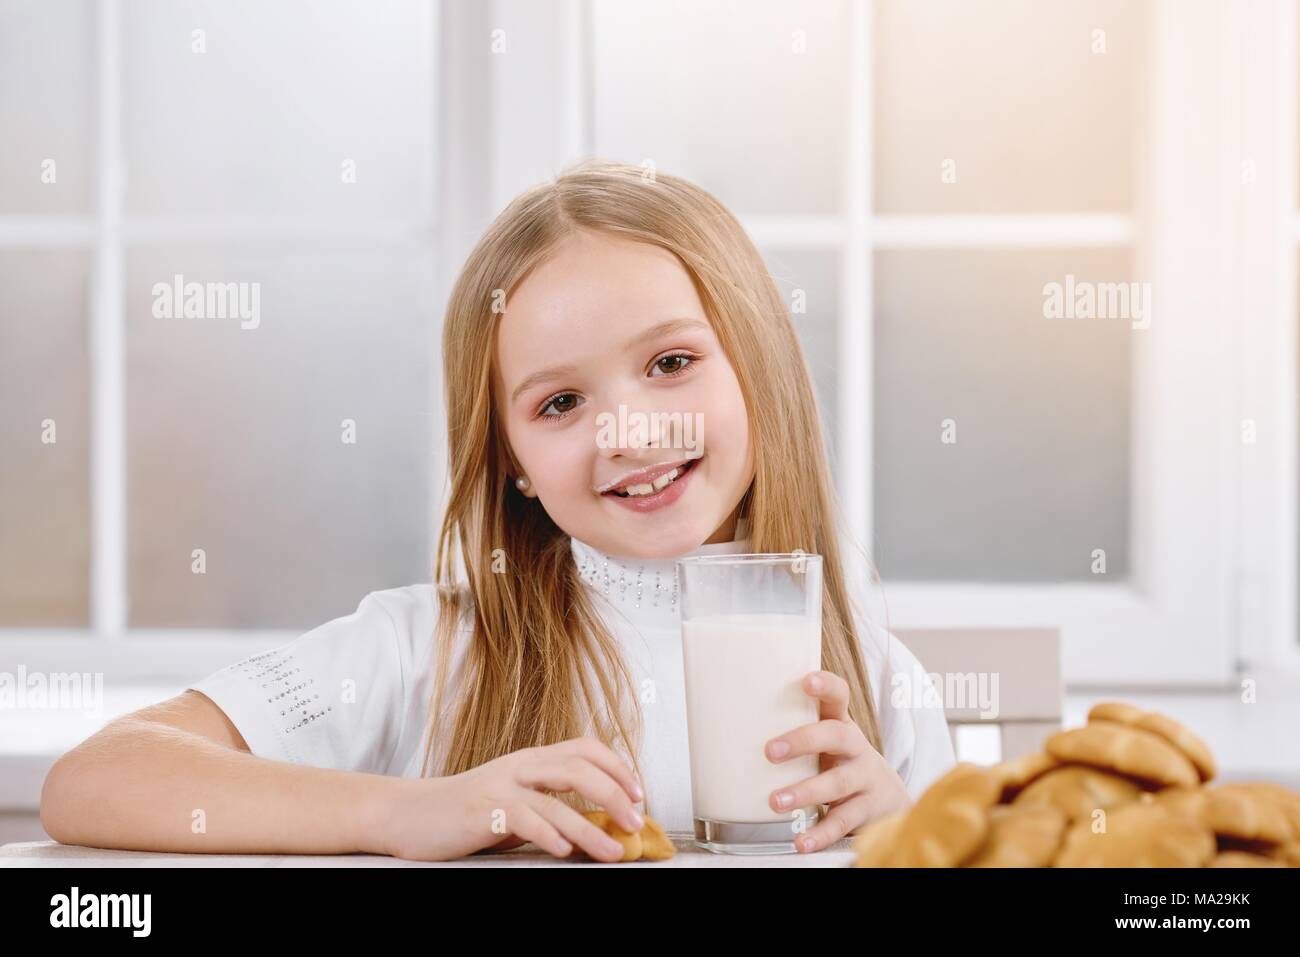 Smiling little girl is drinking milk from transparent glass with delicious  cookies,which lay on brown patterned plate. Child wears white sweatshirt  and has long blonde hair. Window on background Stock Photo -